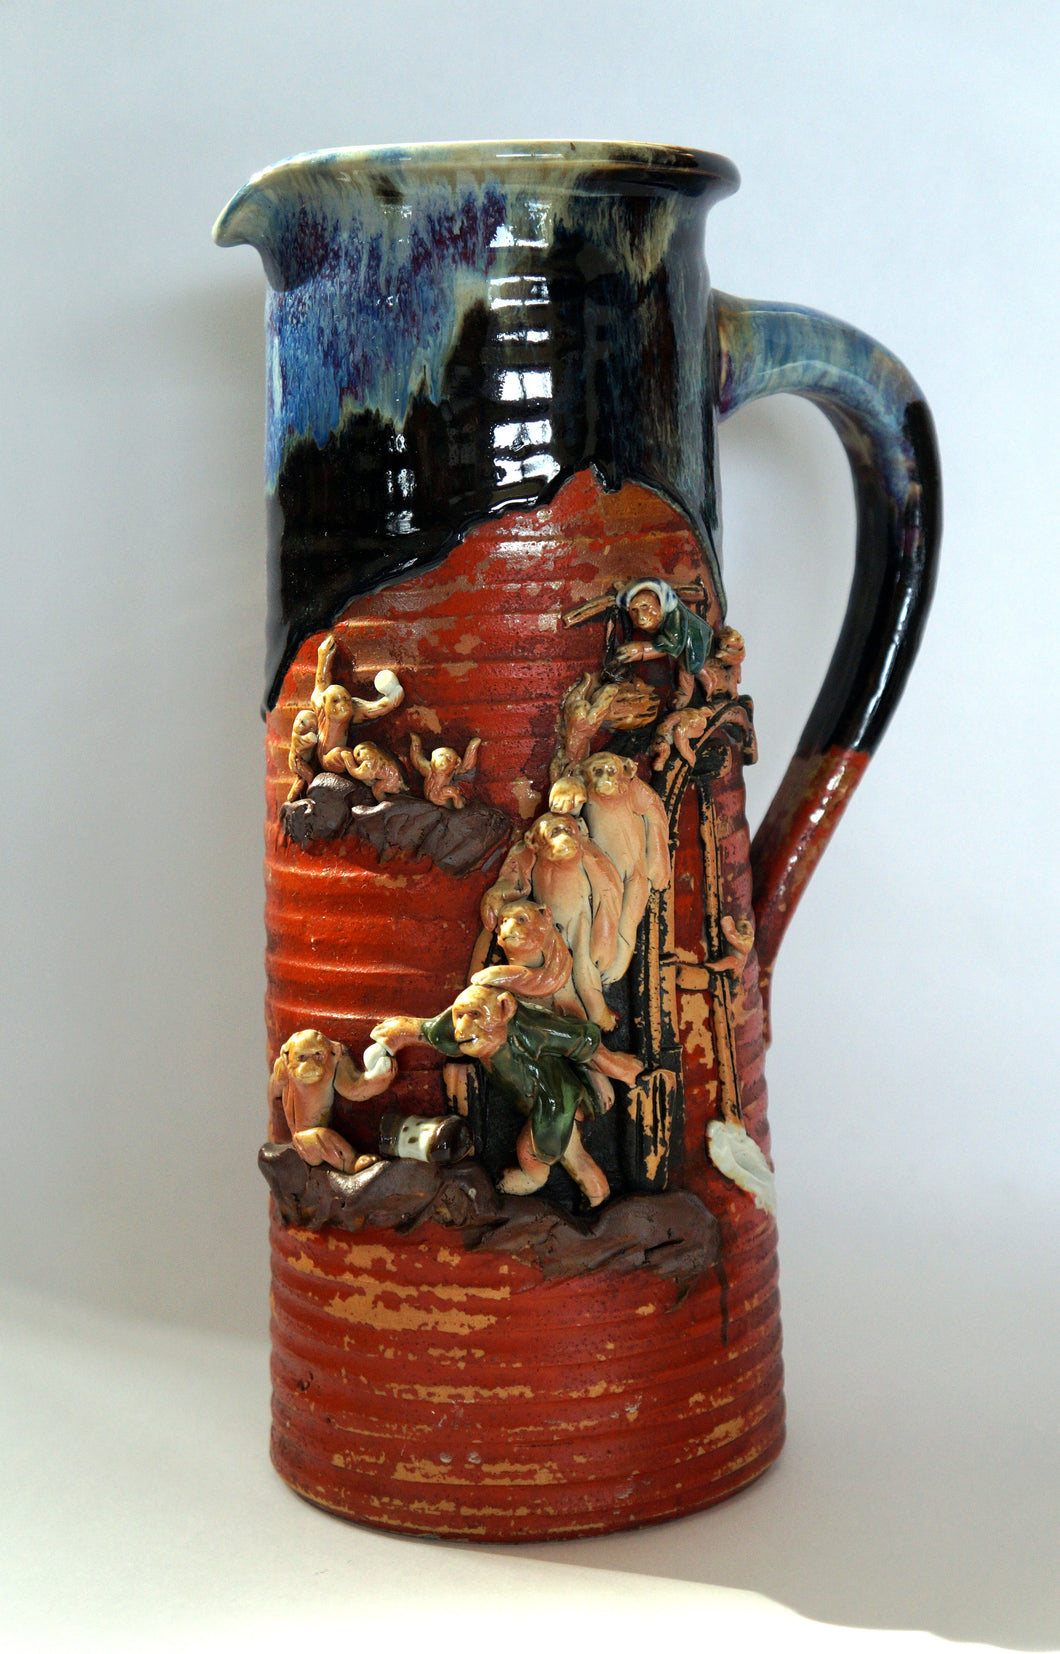 Japanese Ceramics: Sumida Ware of a Tall Pitcher with 13 Monkeys